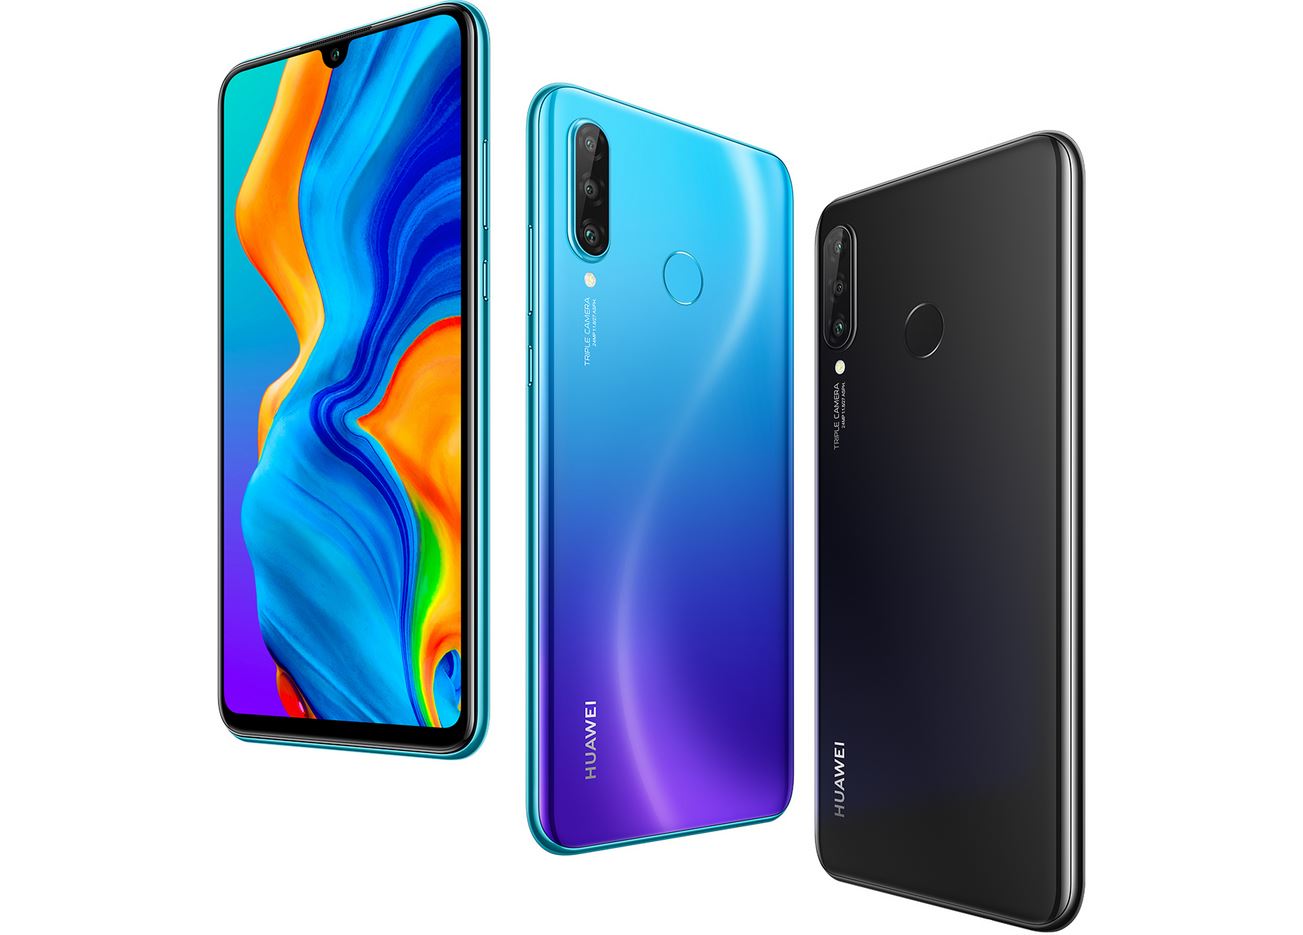 Expanding] Stable EMUI 10 update for Huawei P30 Lite starts to 